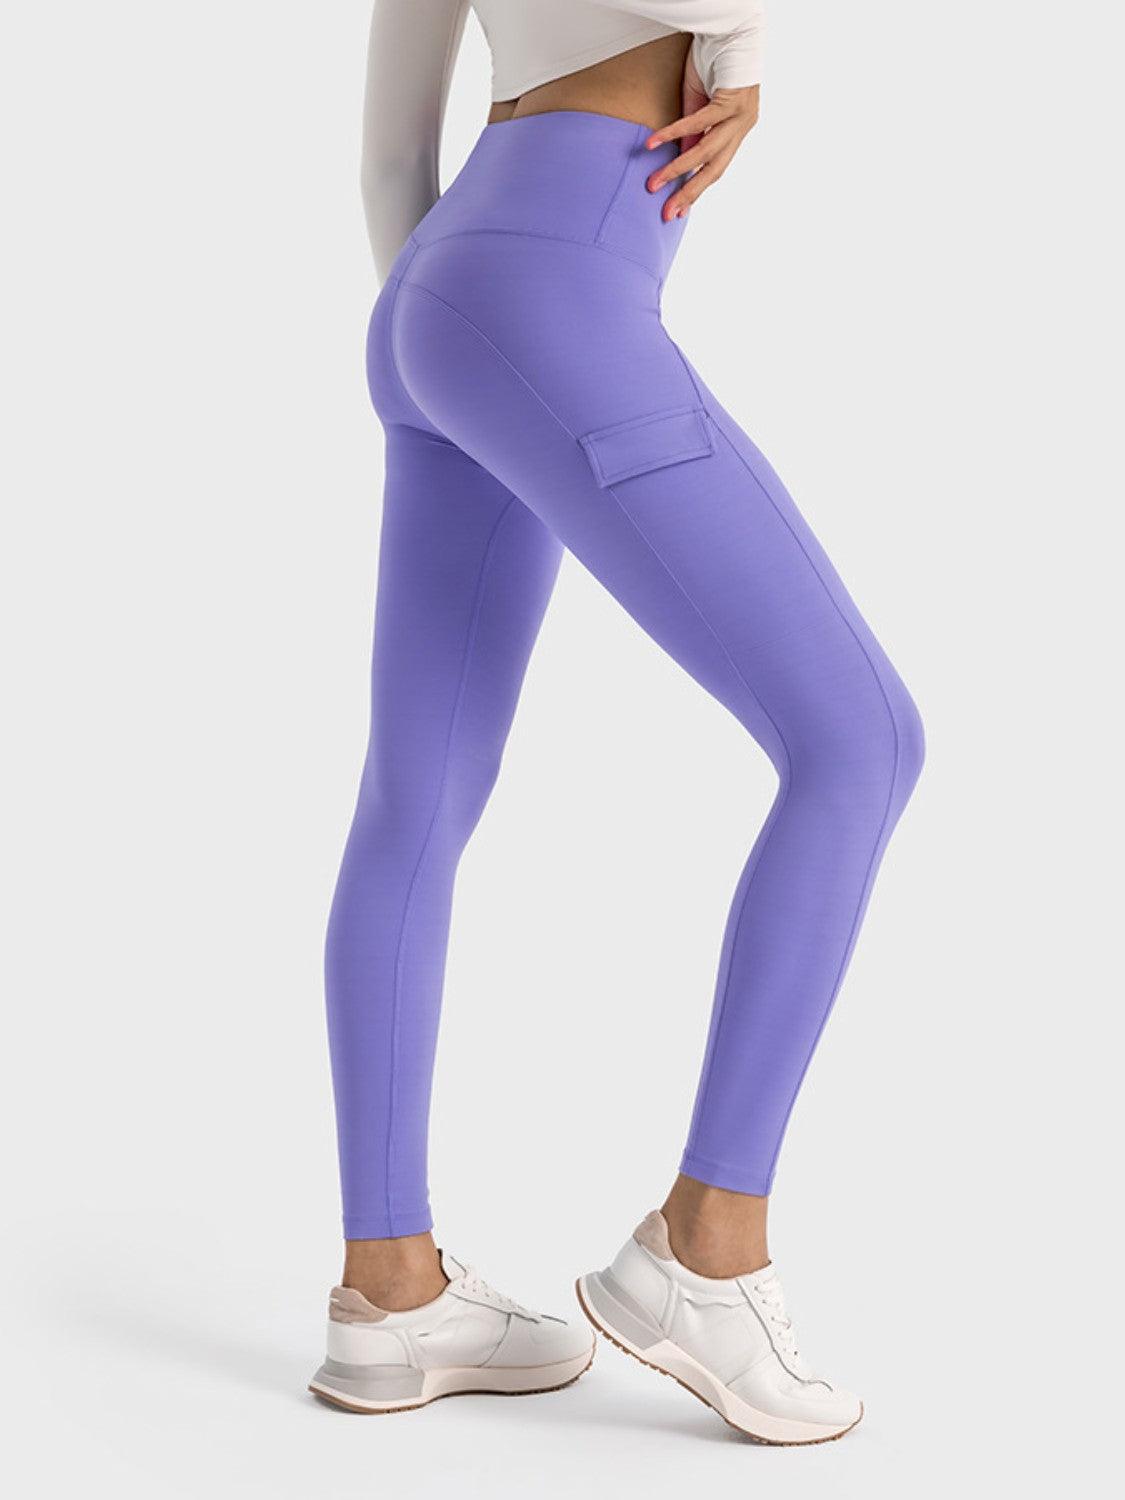 a woman in a white top and purple leggings